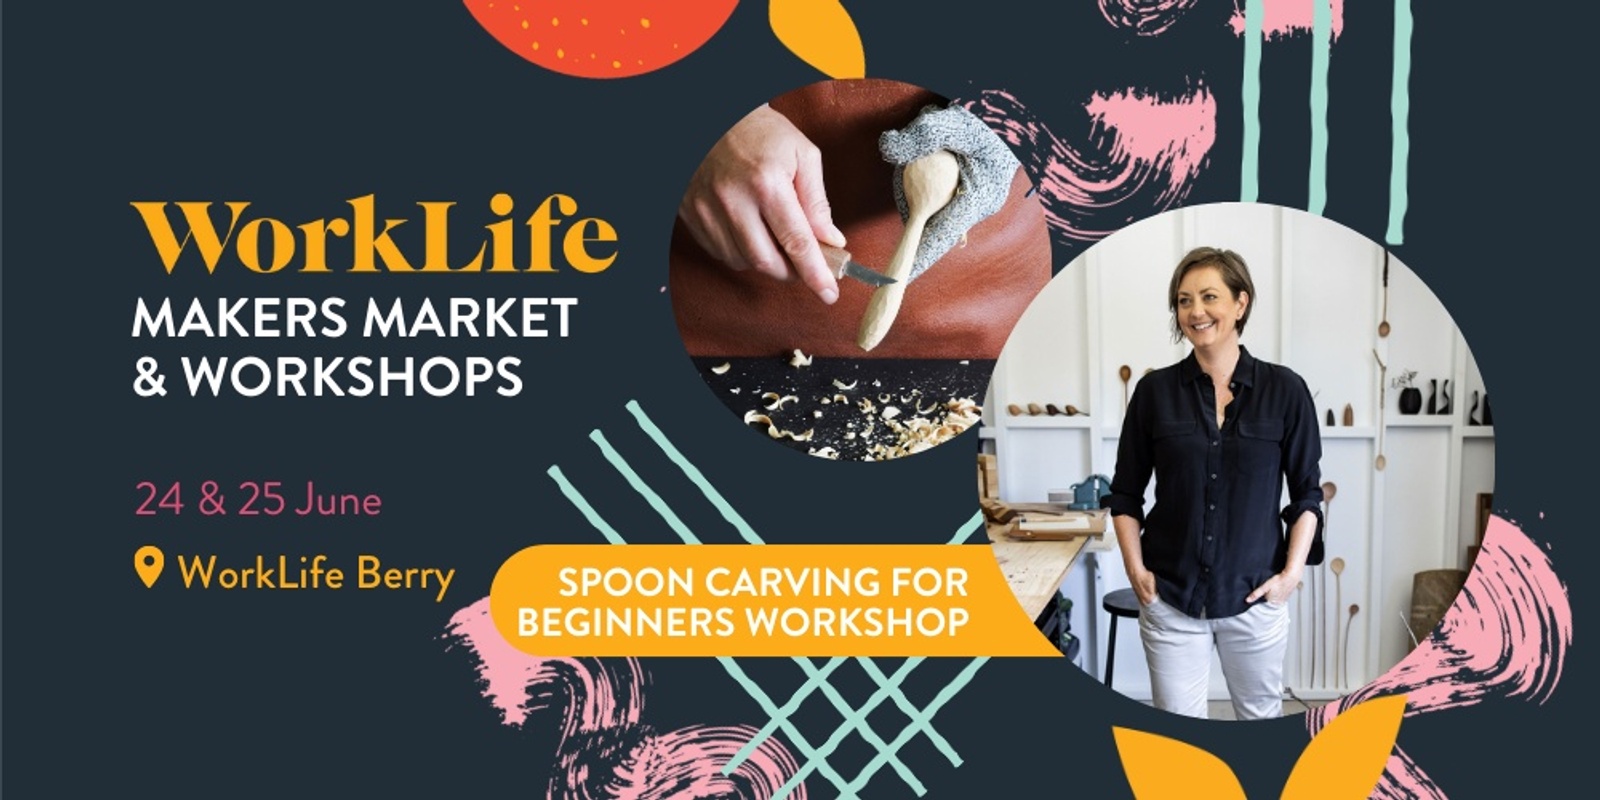 Banner image for Spoon Carving For Beginners with Waiting for Spring for the WorkLife Makers Market & Workshops